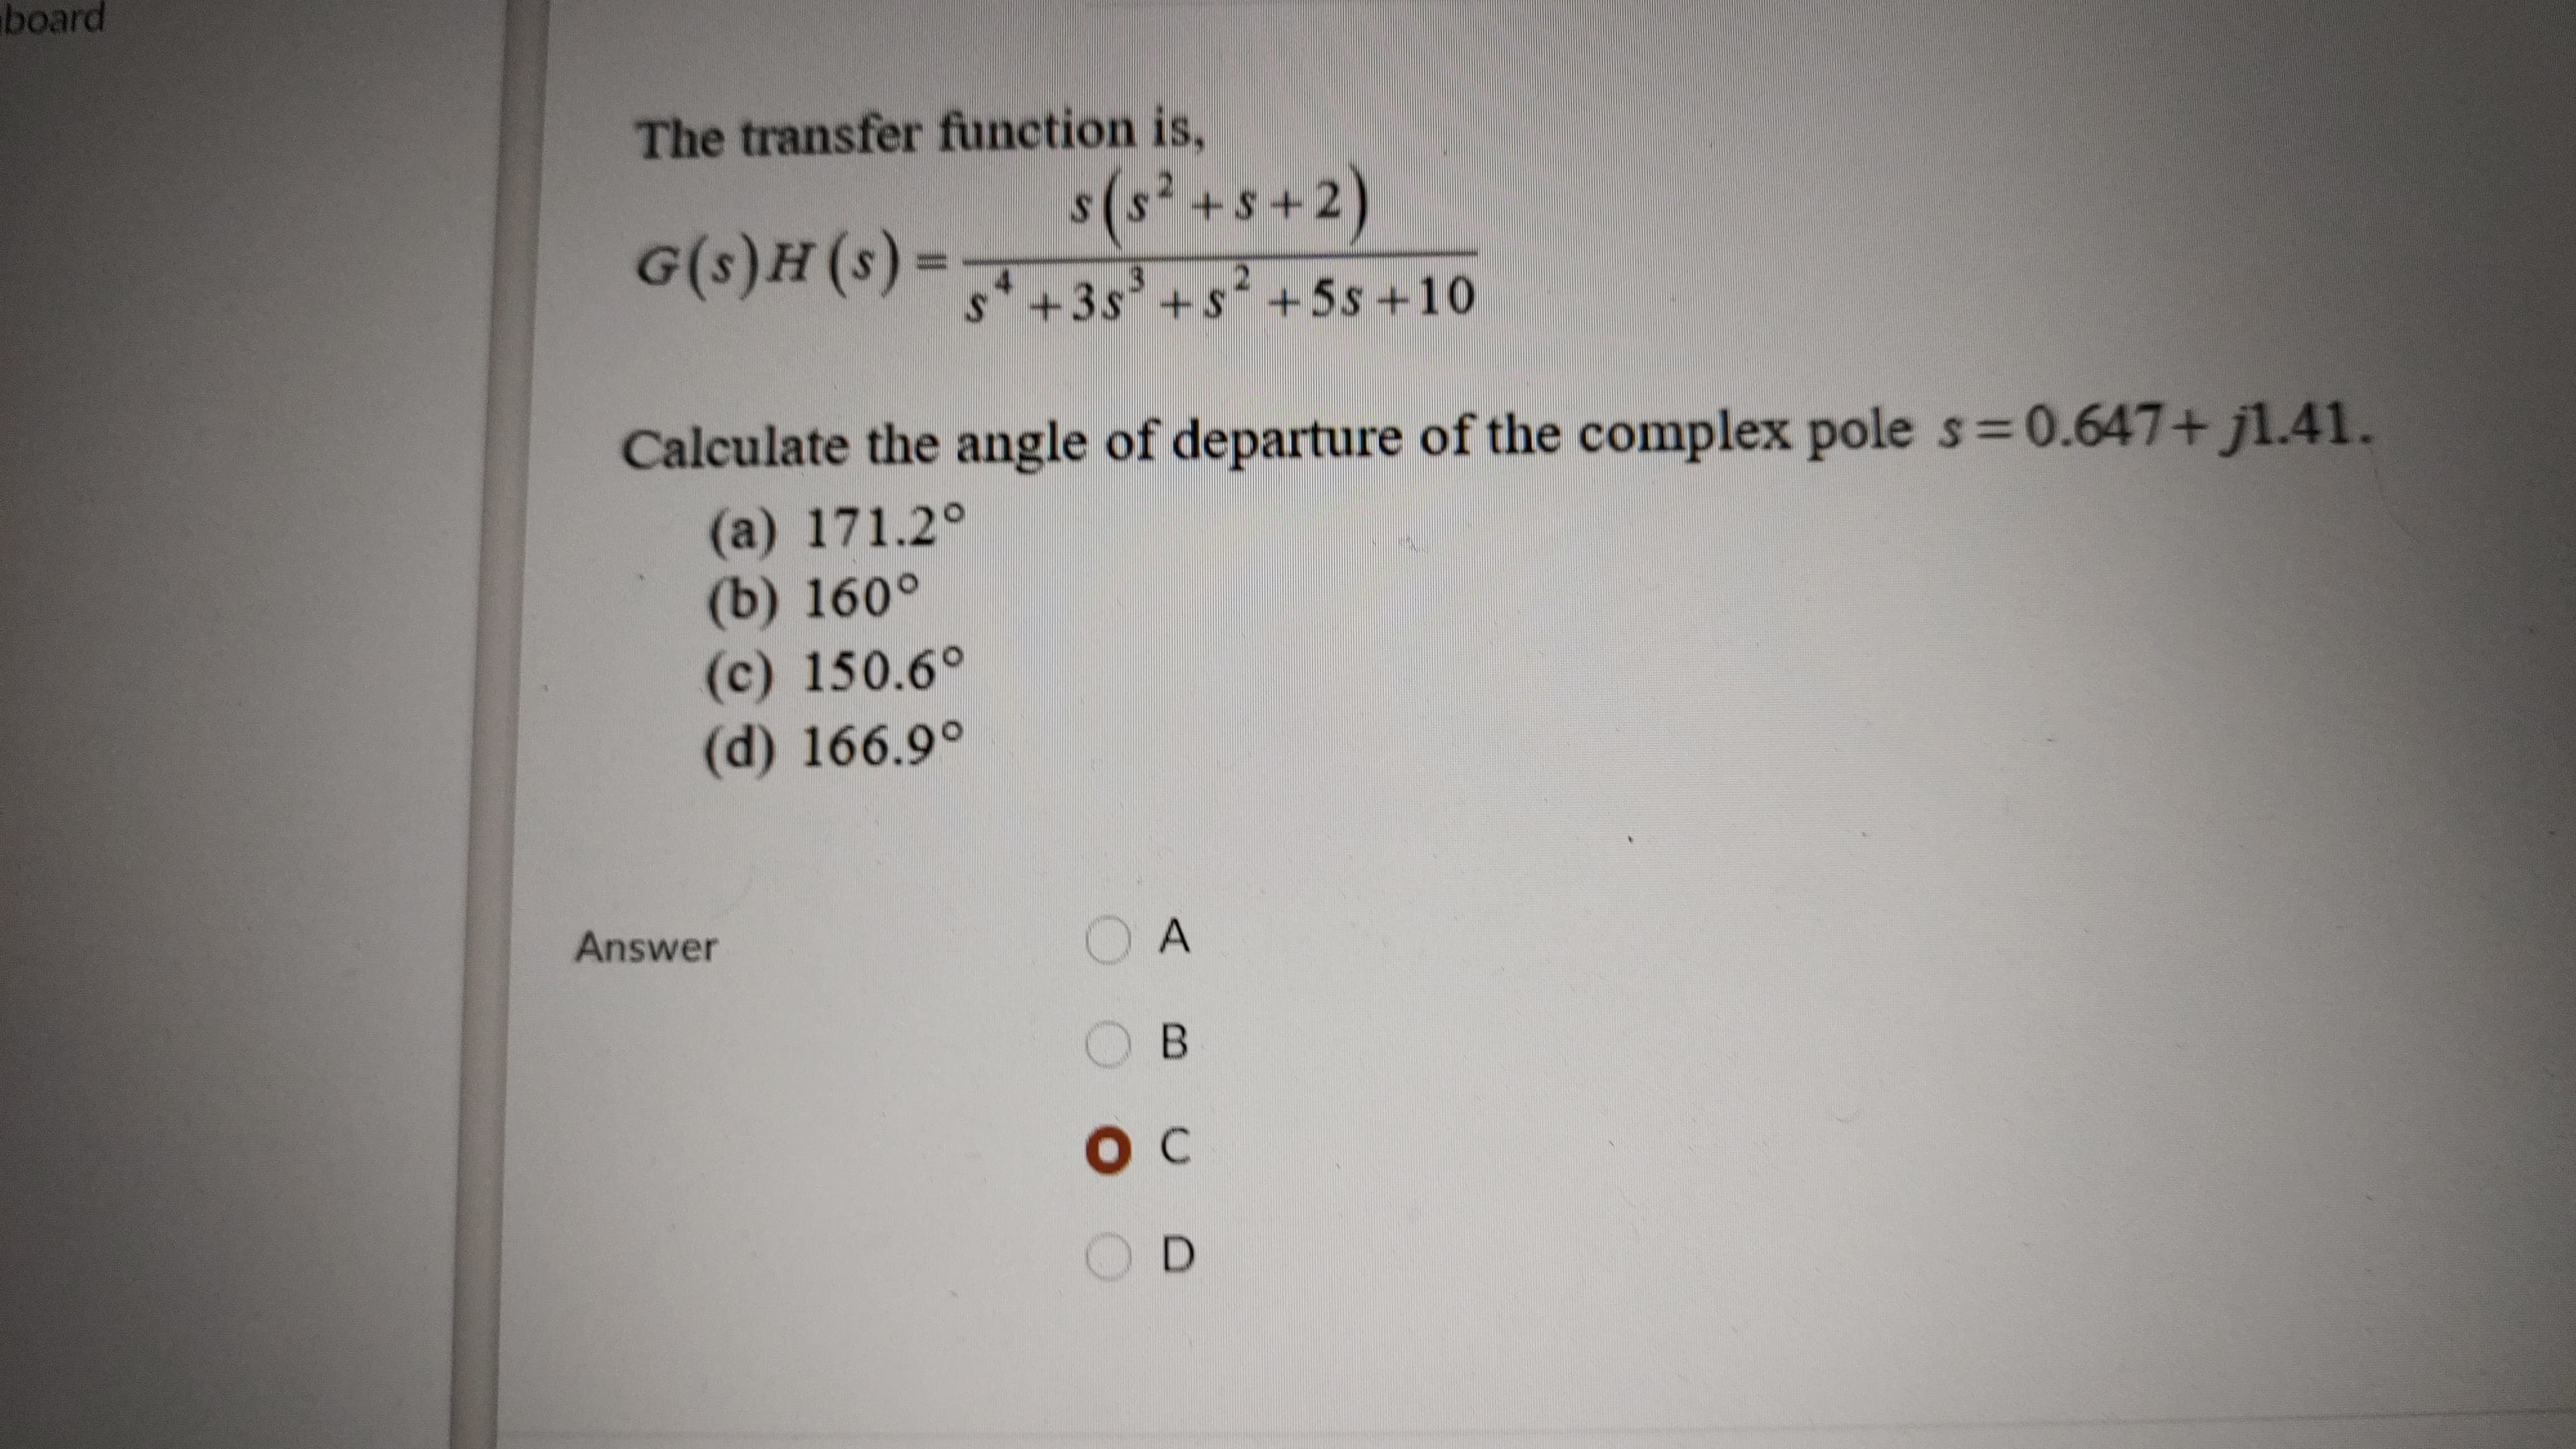 board
The transfer function is,
s(s² +s+2)
4.
s+3s'+s+5s+10
2.
3(s) H(s)ɔ
Calculate the angle of departure of the complex pole s 0.647+ j1.41.
(a) 171.2°
(b) 160°
(c) 150.6°
(d) 166.9°
Answer
O A
B.
D.
